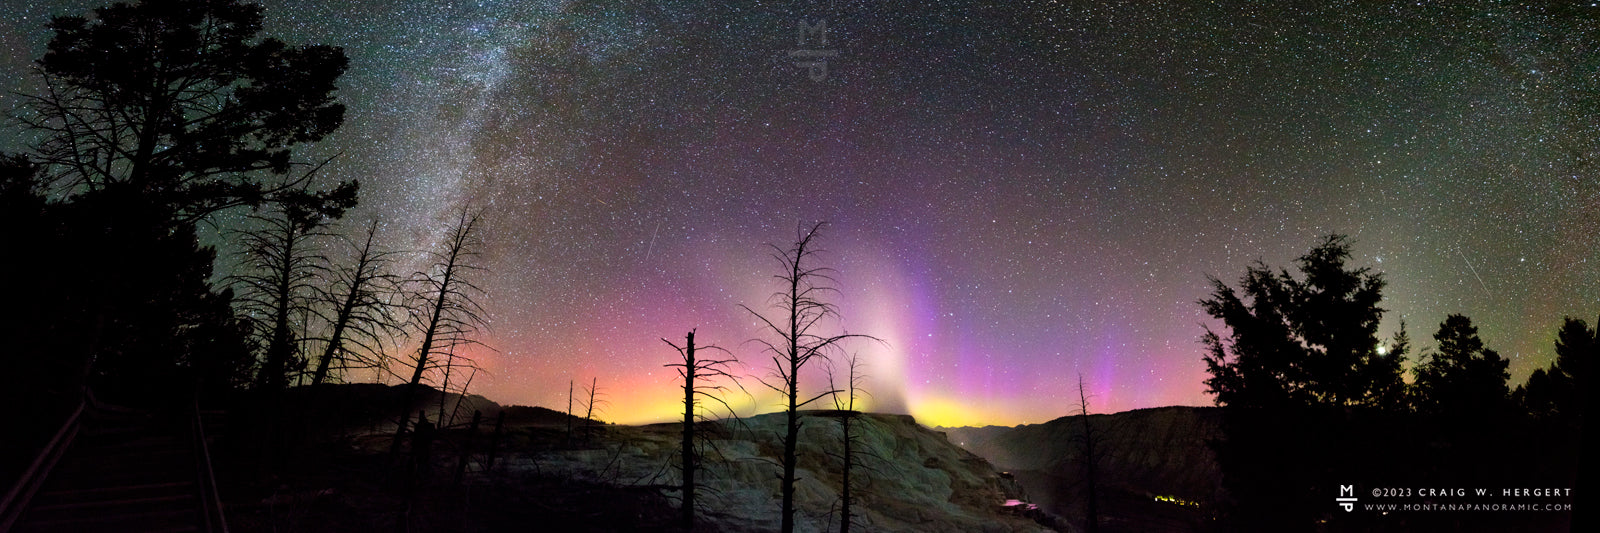 "Canary Spring under the Northern Lights" - Yellowstone National Park, MT (OE)